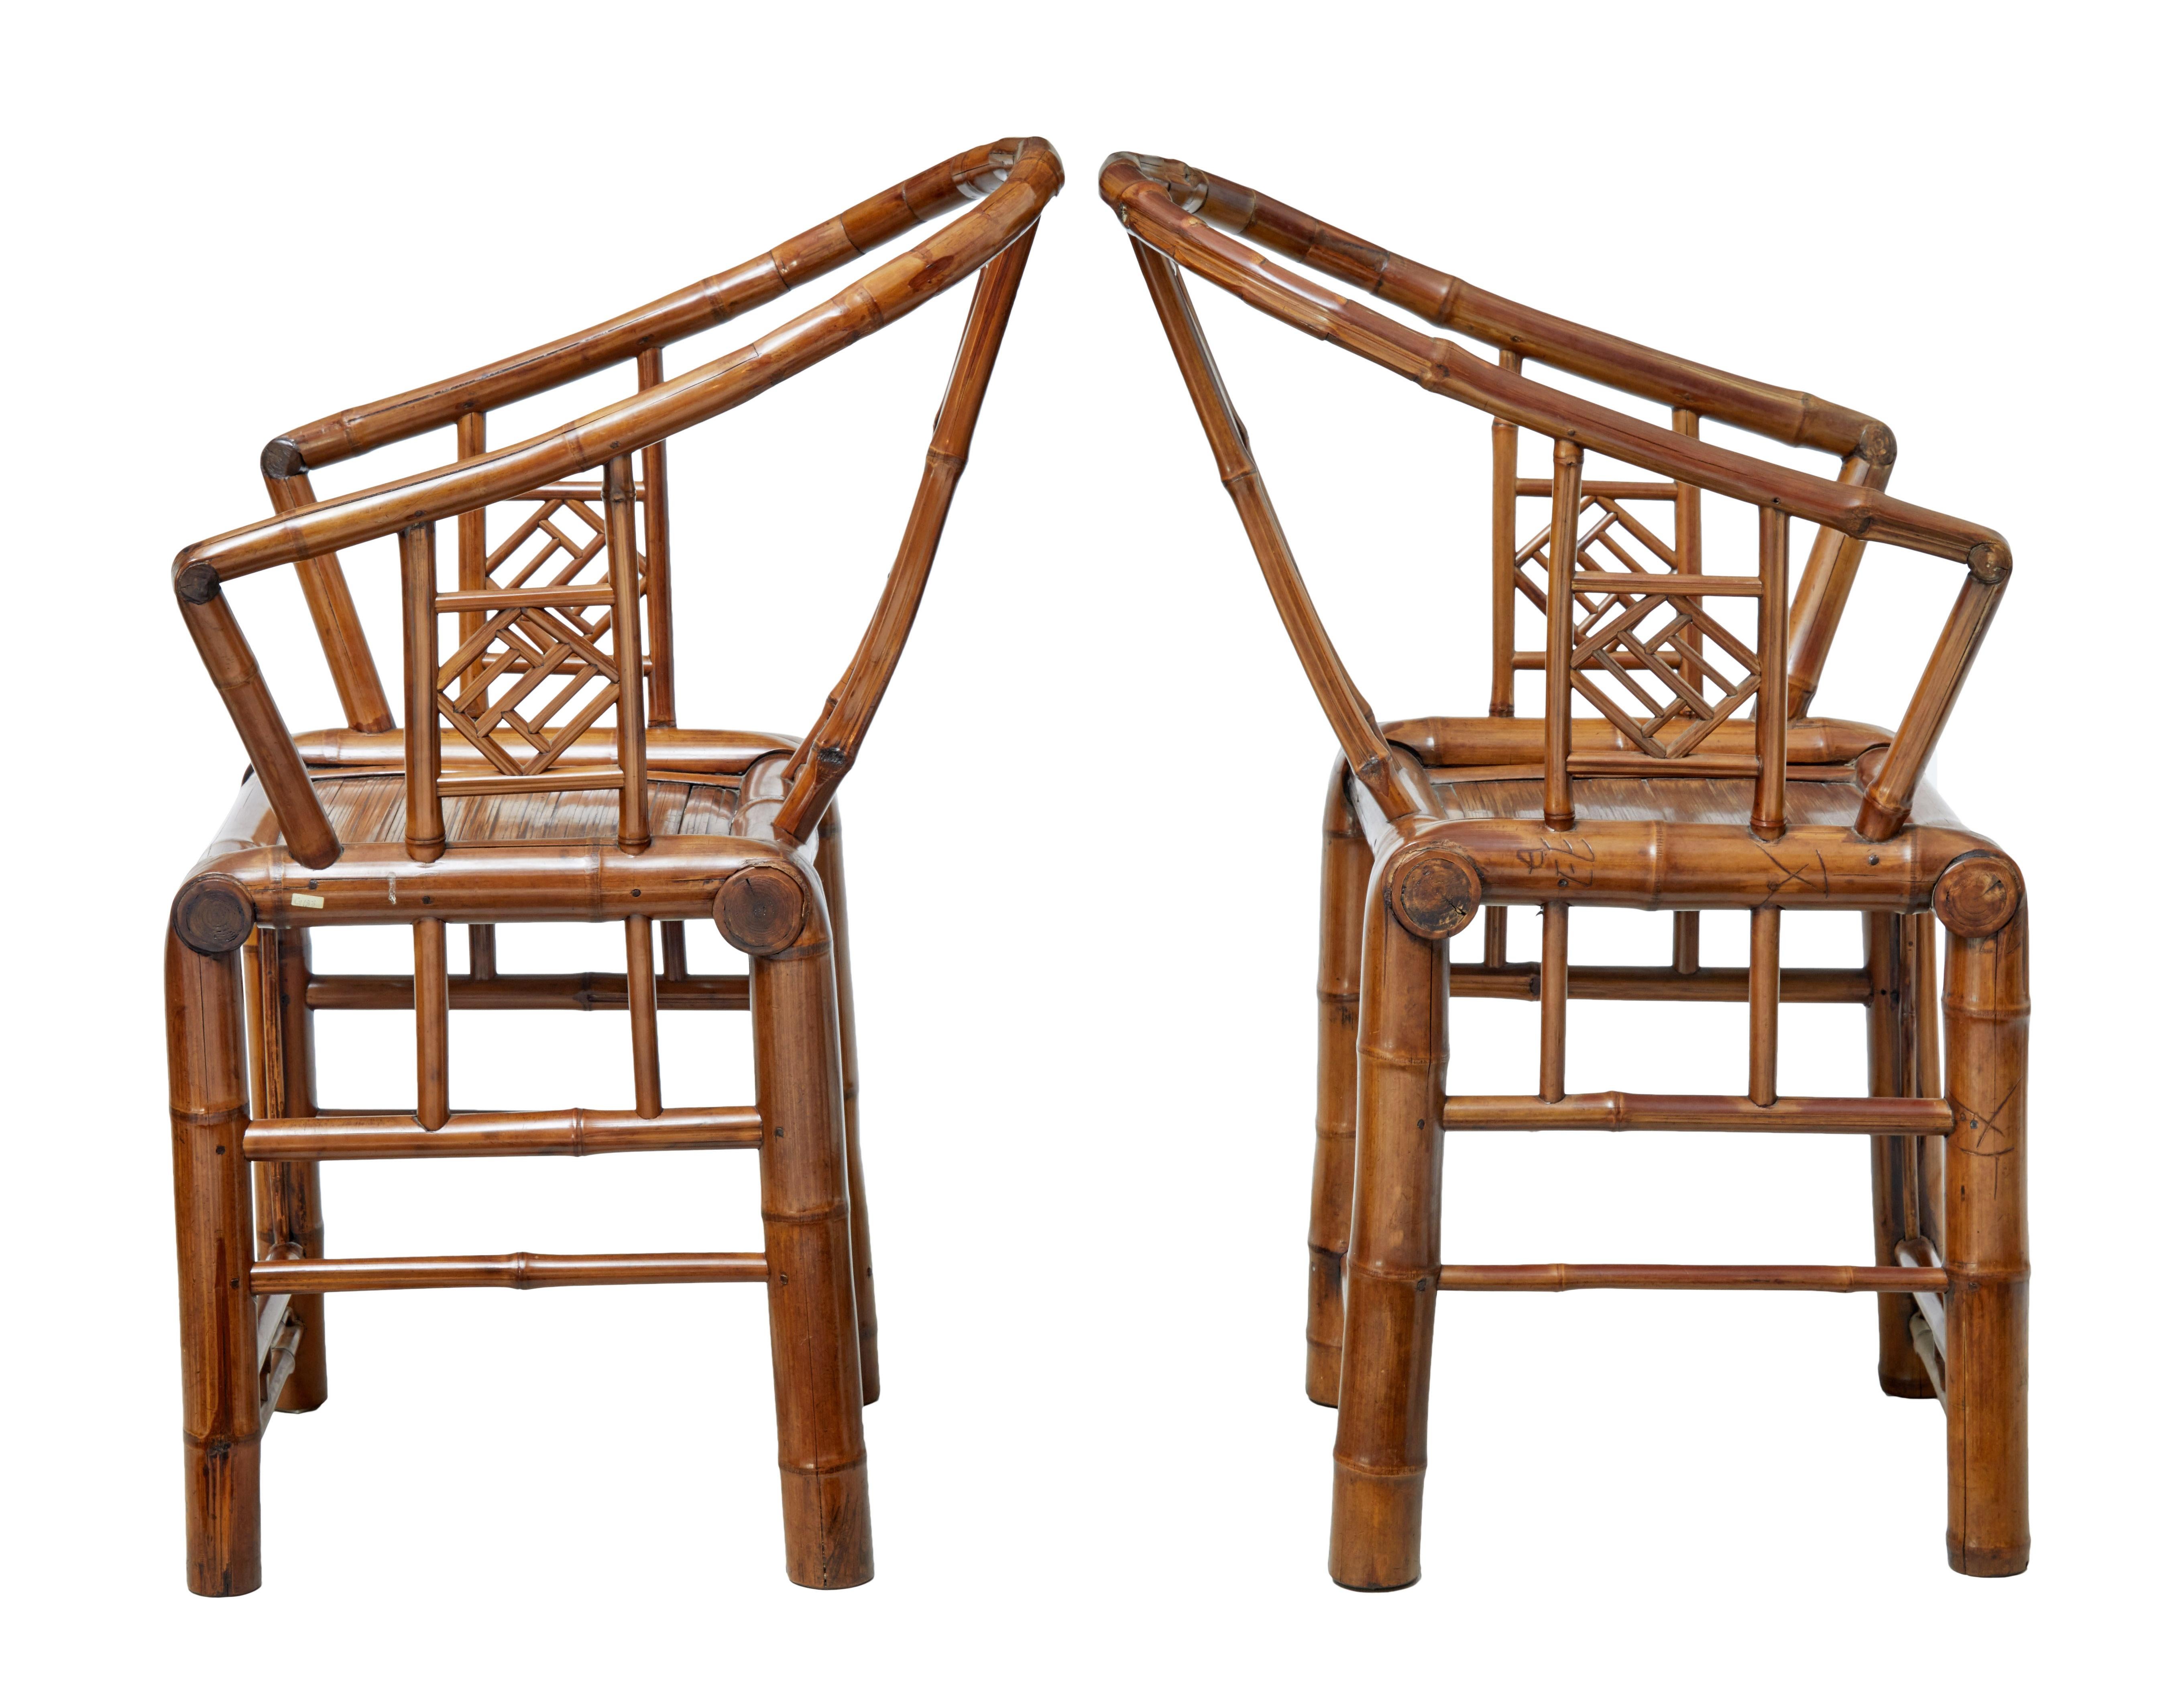 Unusual pair of Chinese bamboo armchairs, circa 1920.

Shaped back and made from various thicknesses of bamboo, ranging from small for the detail work and thick canes for the legs.

Shaped arms. Seat and backrest made from split bamboo. More